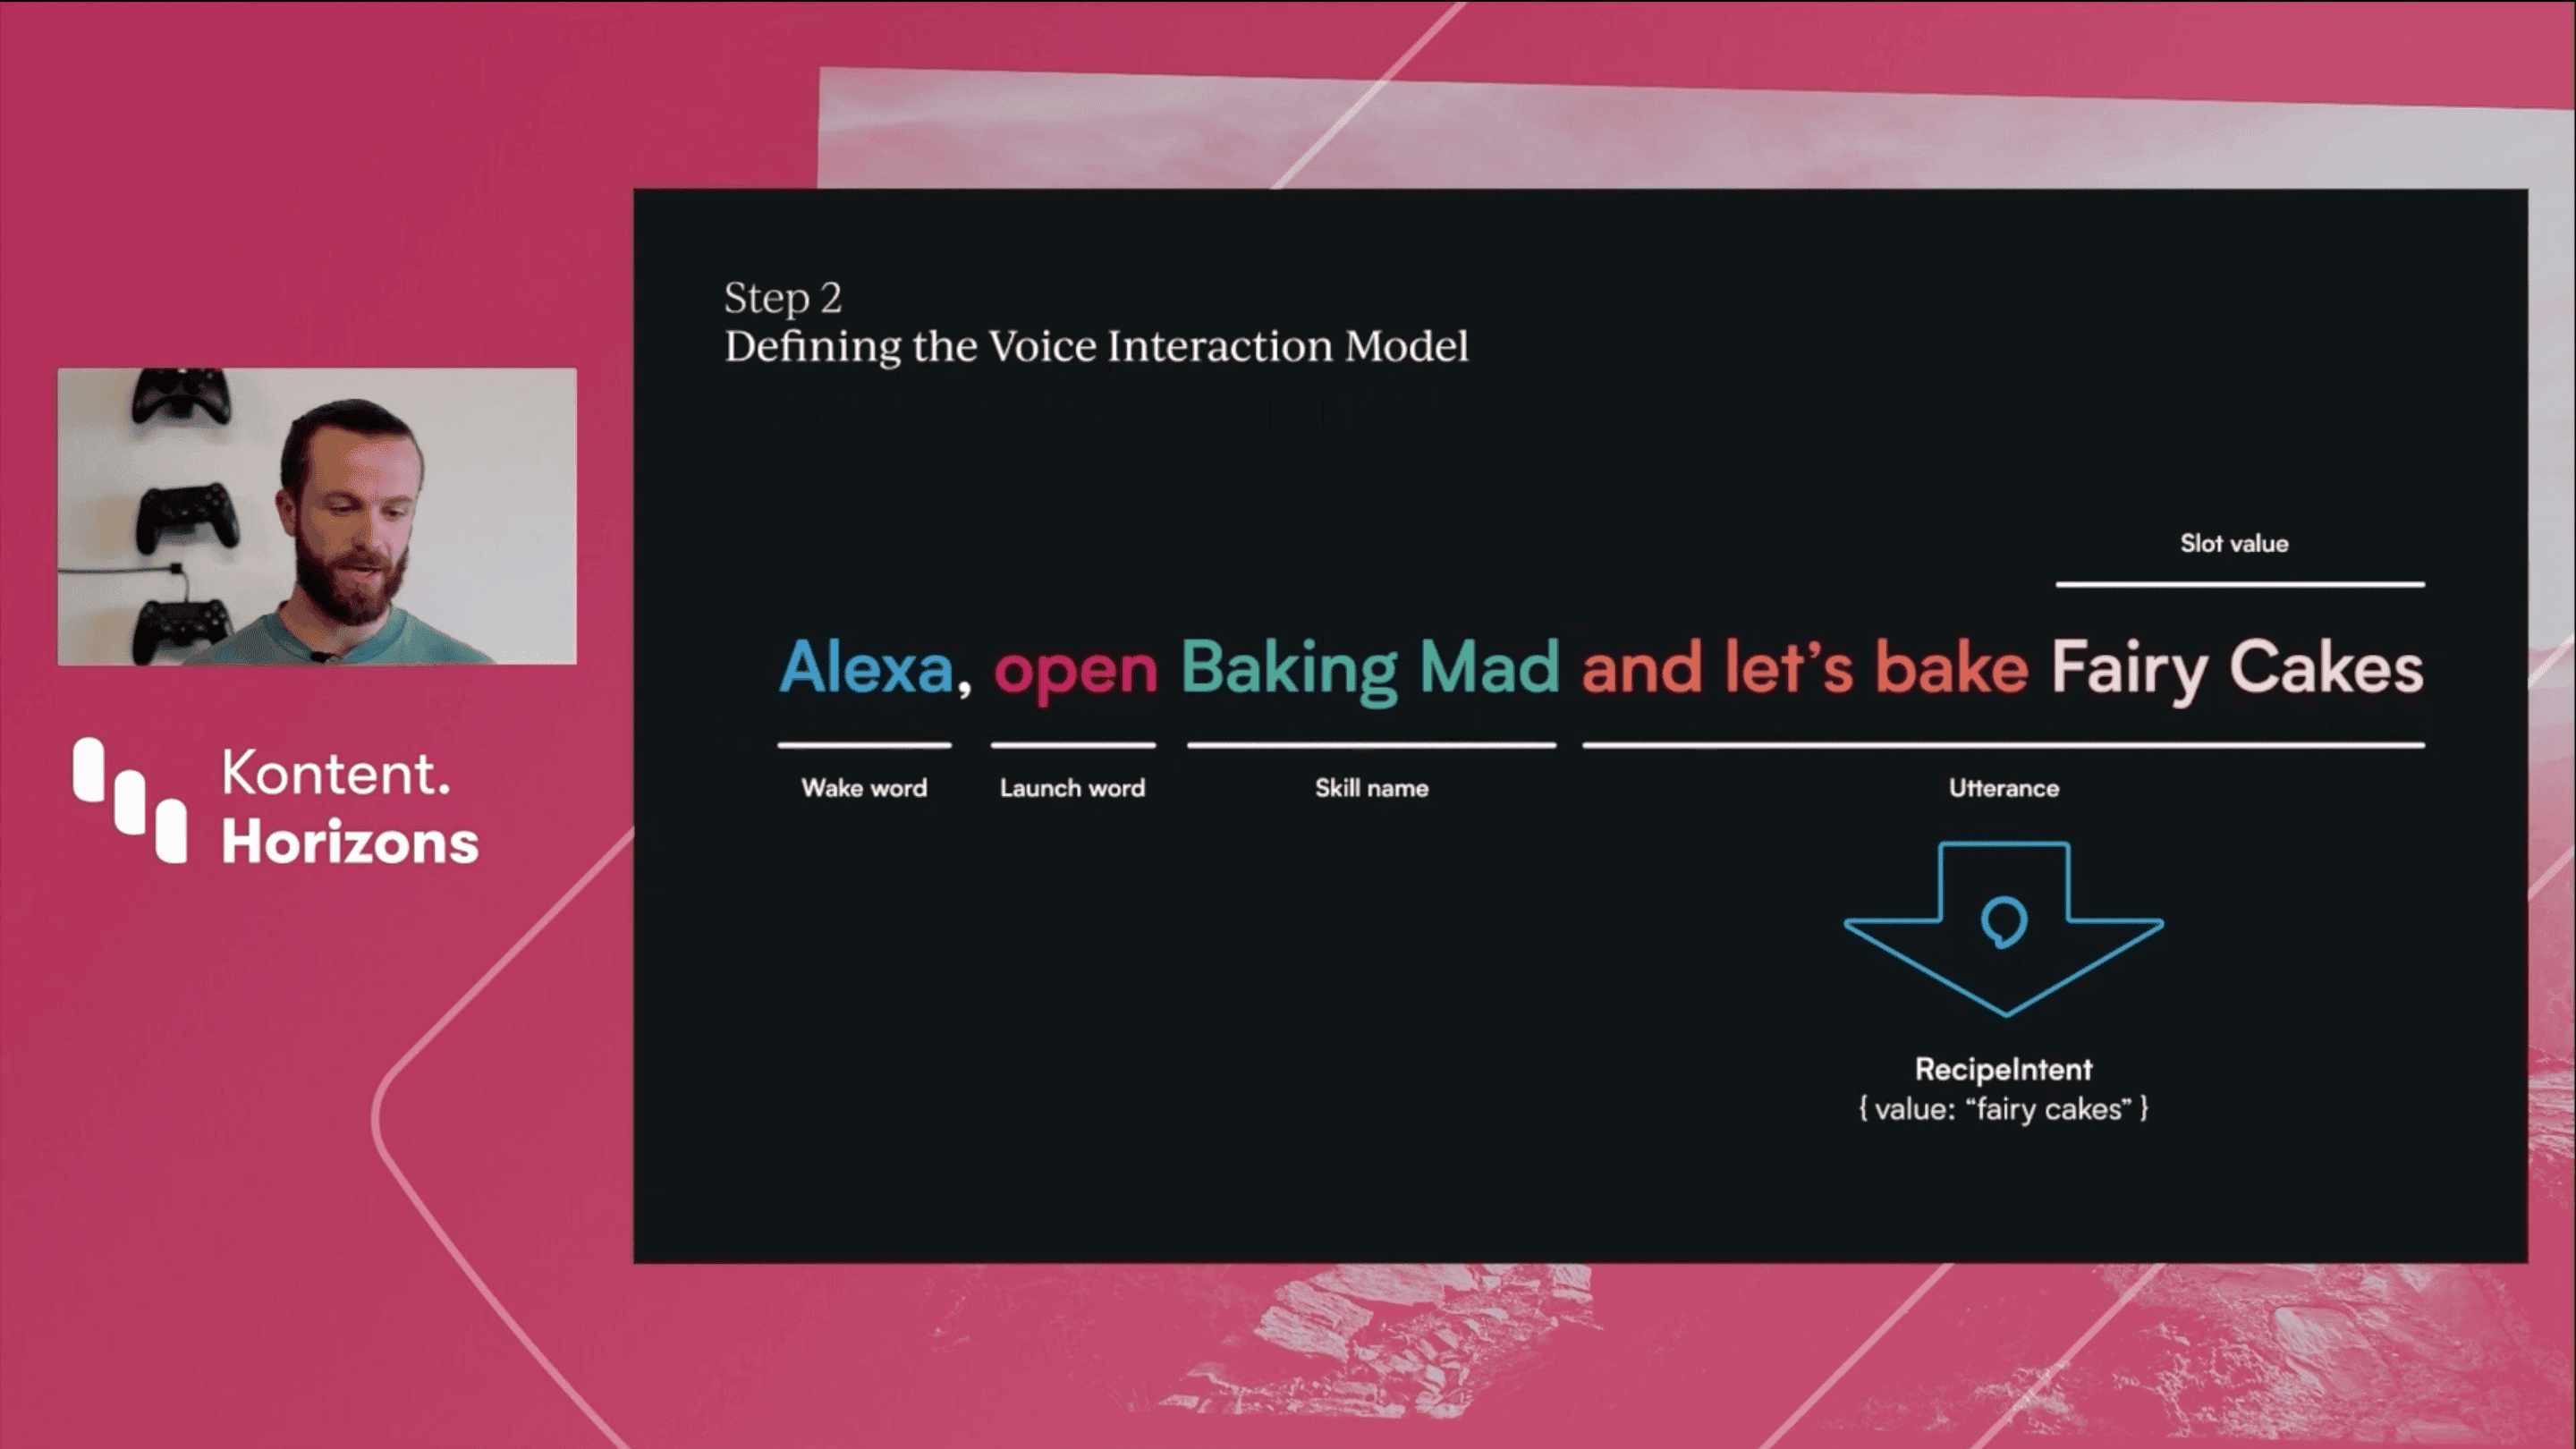 Defining the voice interaction model for Baking Mad and Alexa